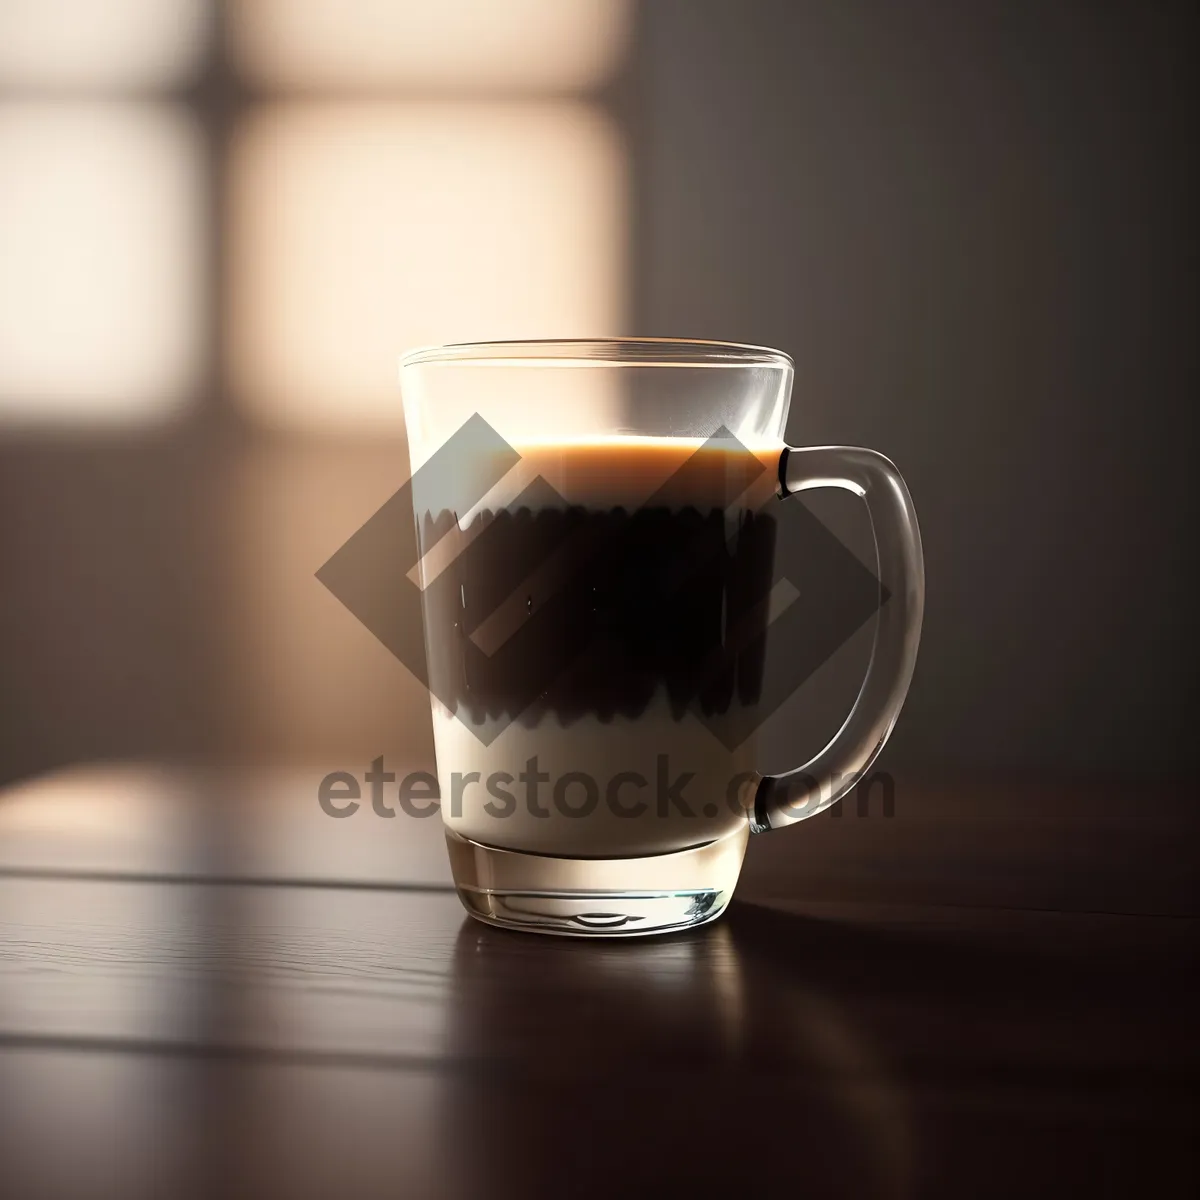 Picture of Hot Espresso Cup on Restaurant Table